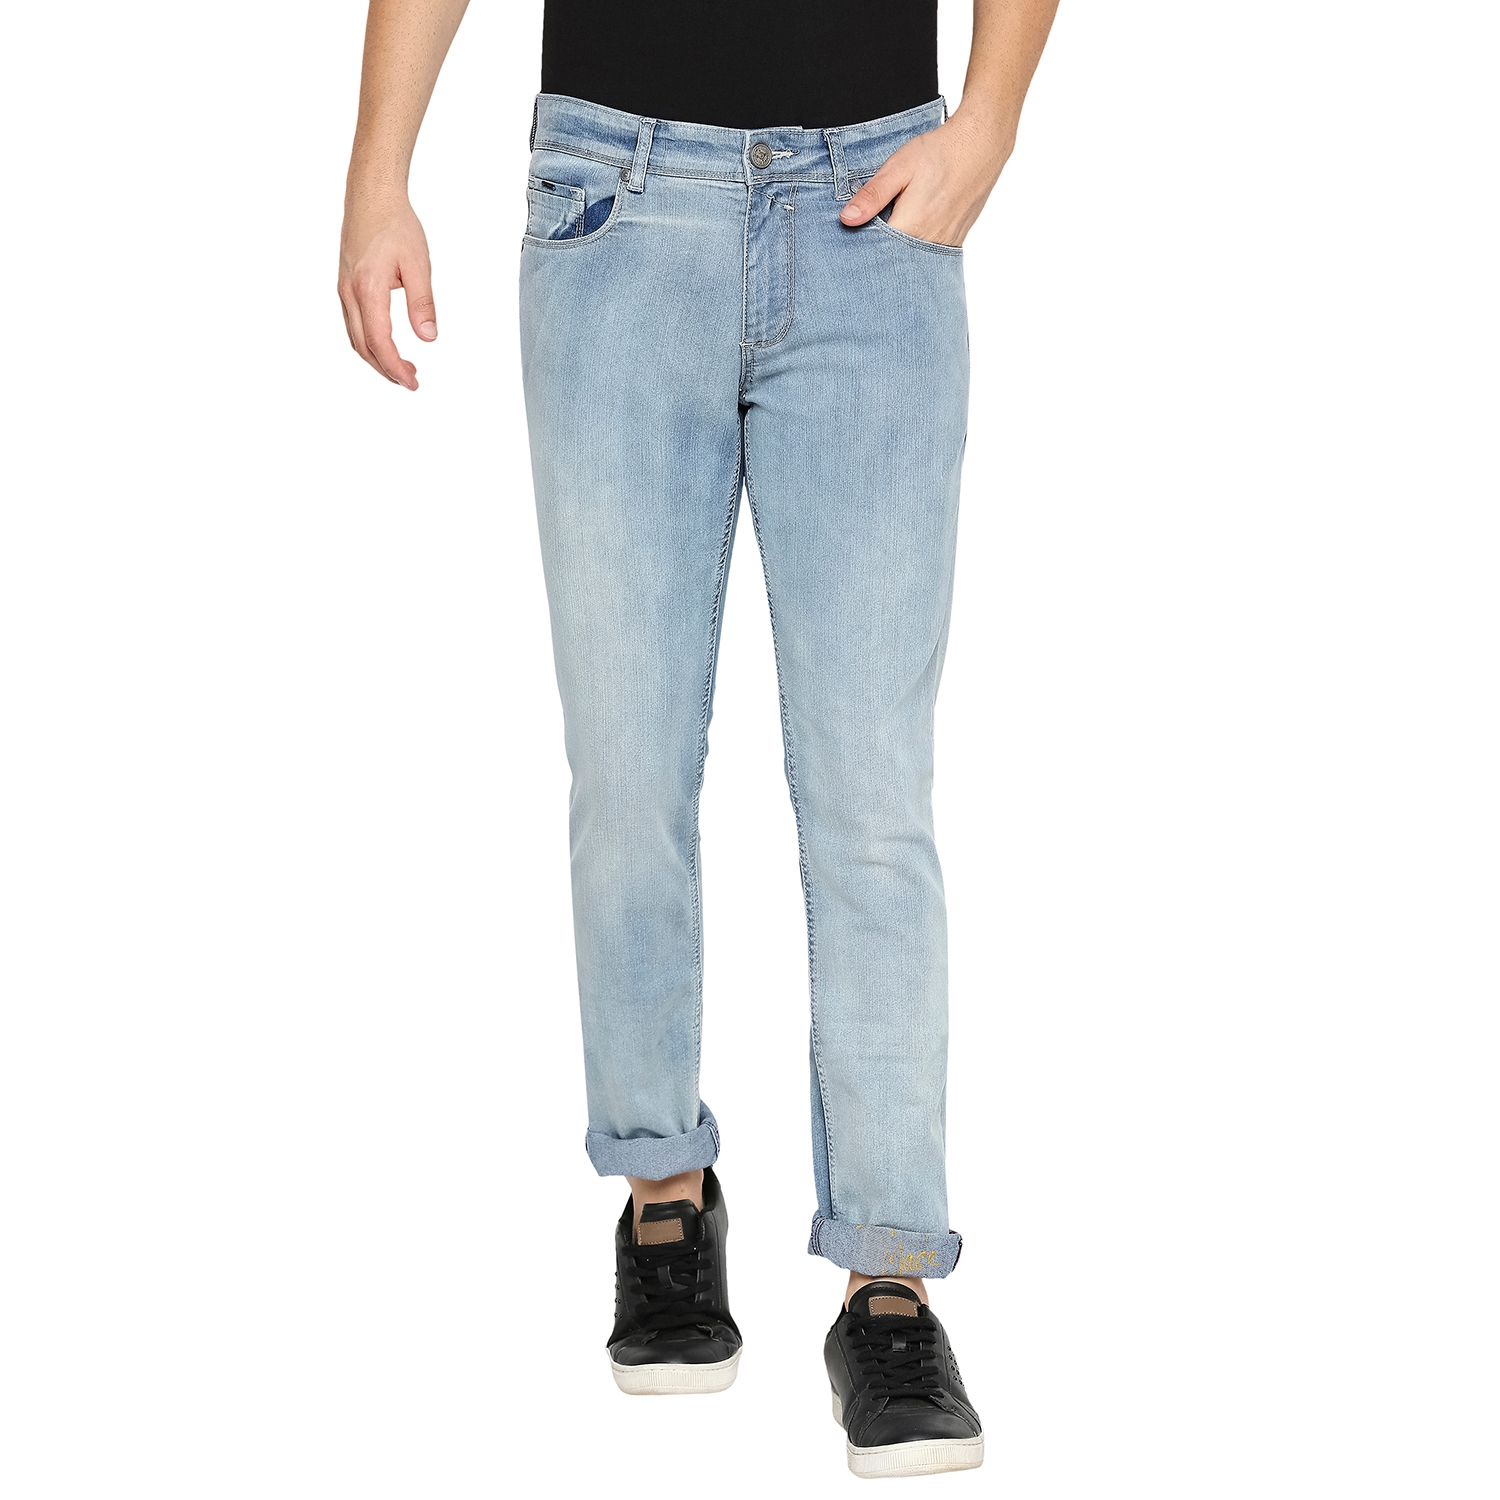 BASICS CASUAL PLAIN BLUE COTTON POLYESTER STRETCH BLADE JEANS 